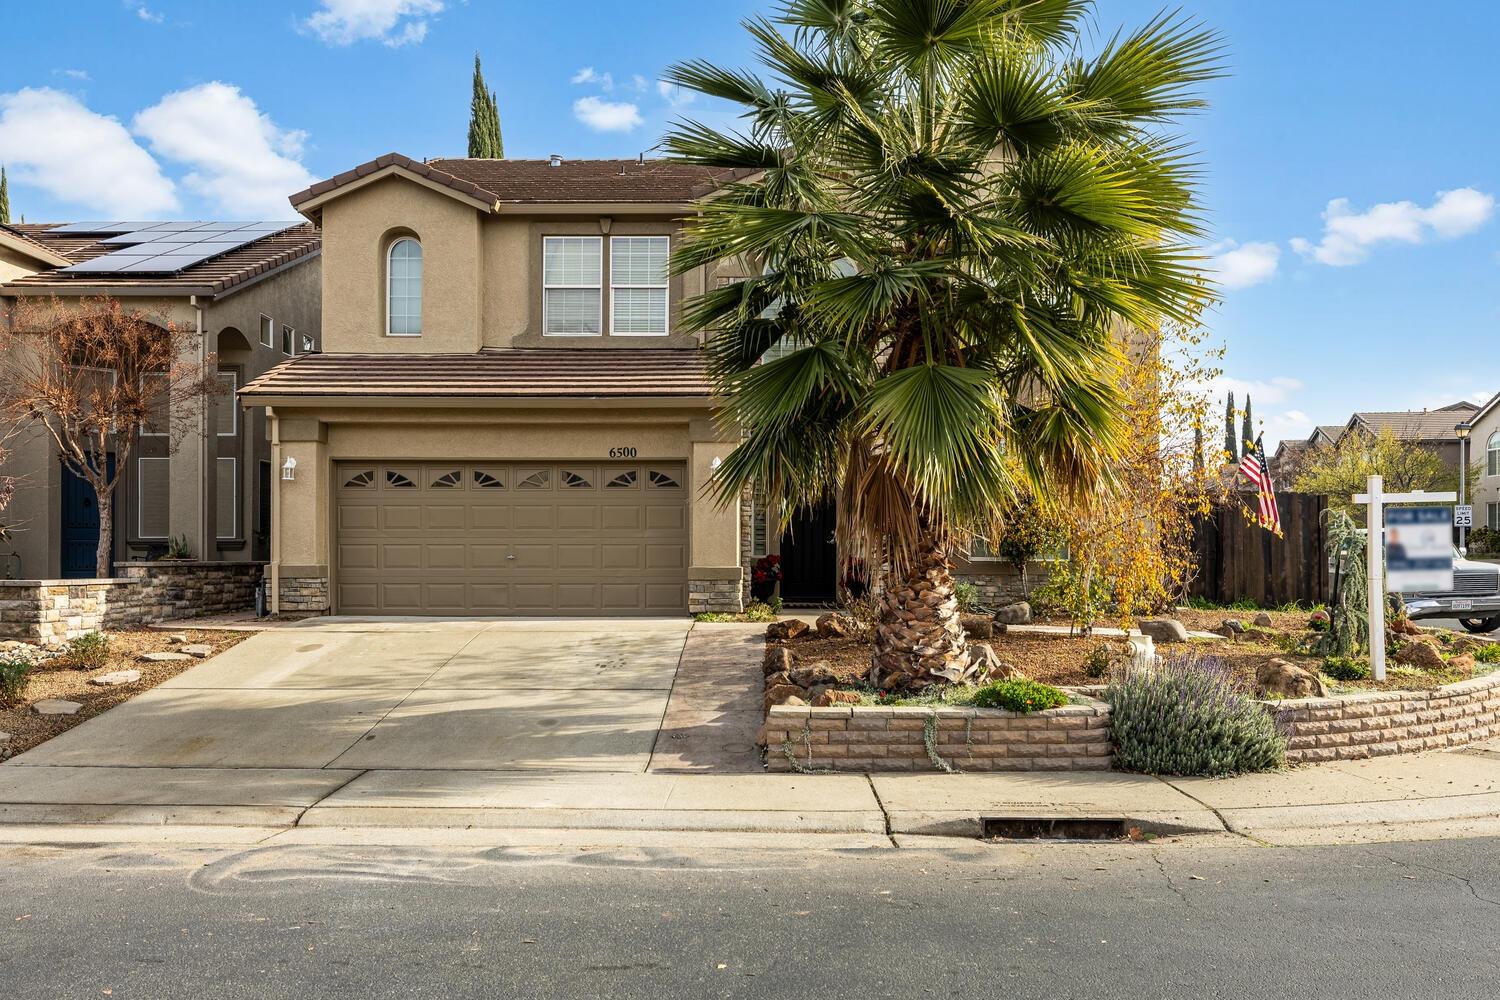 Photo of 6500 Aster Ct in Rocklin, CA